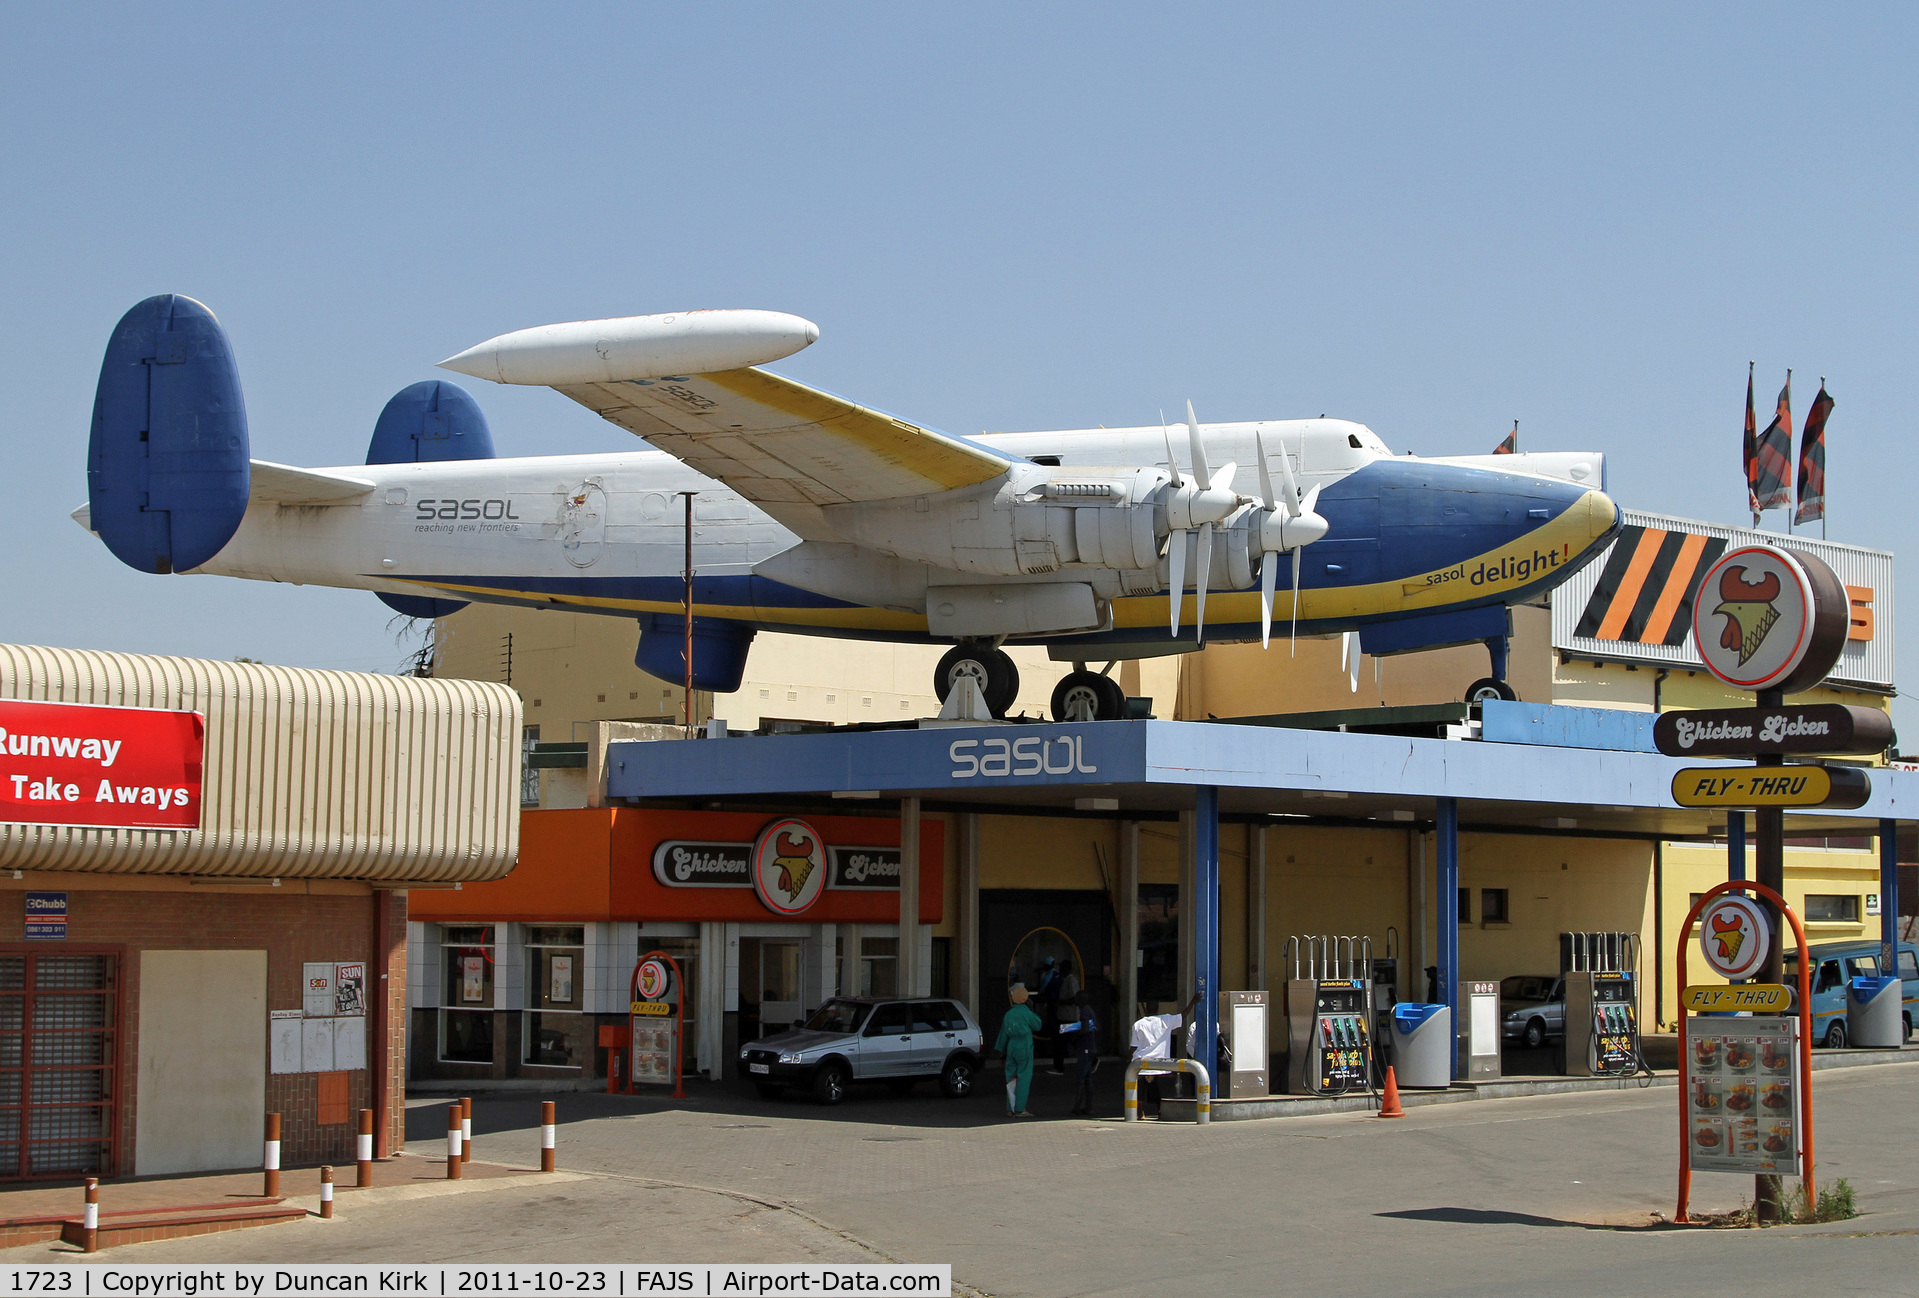 1723, Avro 716 Shackleton MR3/3 C/N 1533, This ex SAAF Shackleton sits atop a garage south of Johannesburg. It has work several different colorschemes